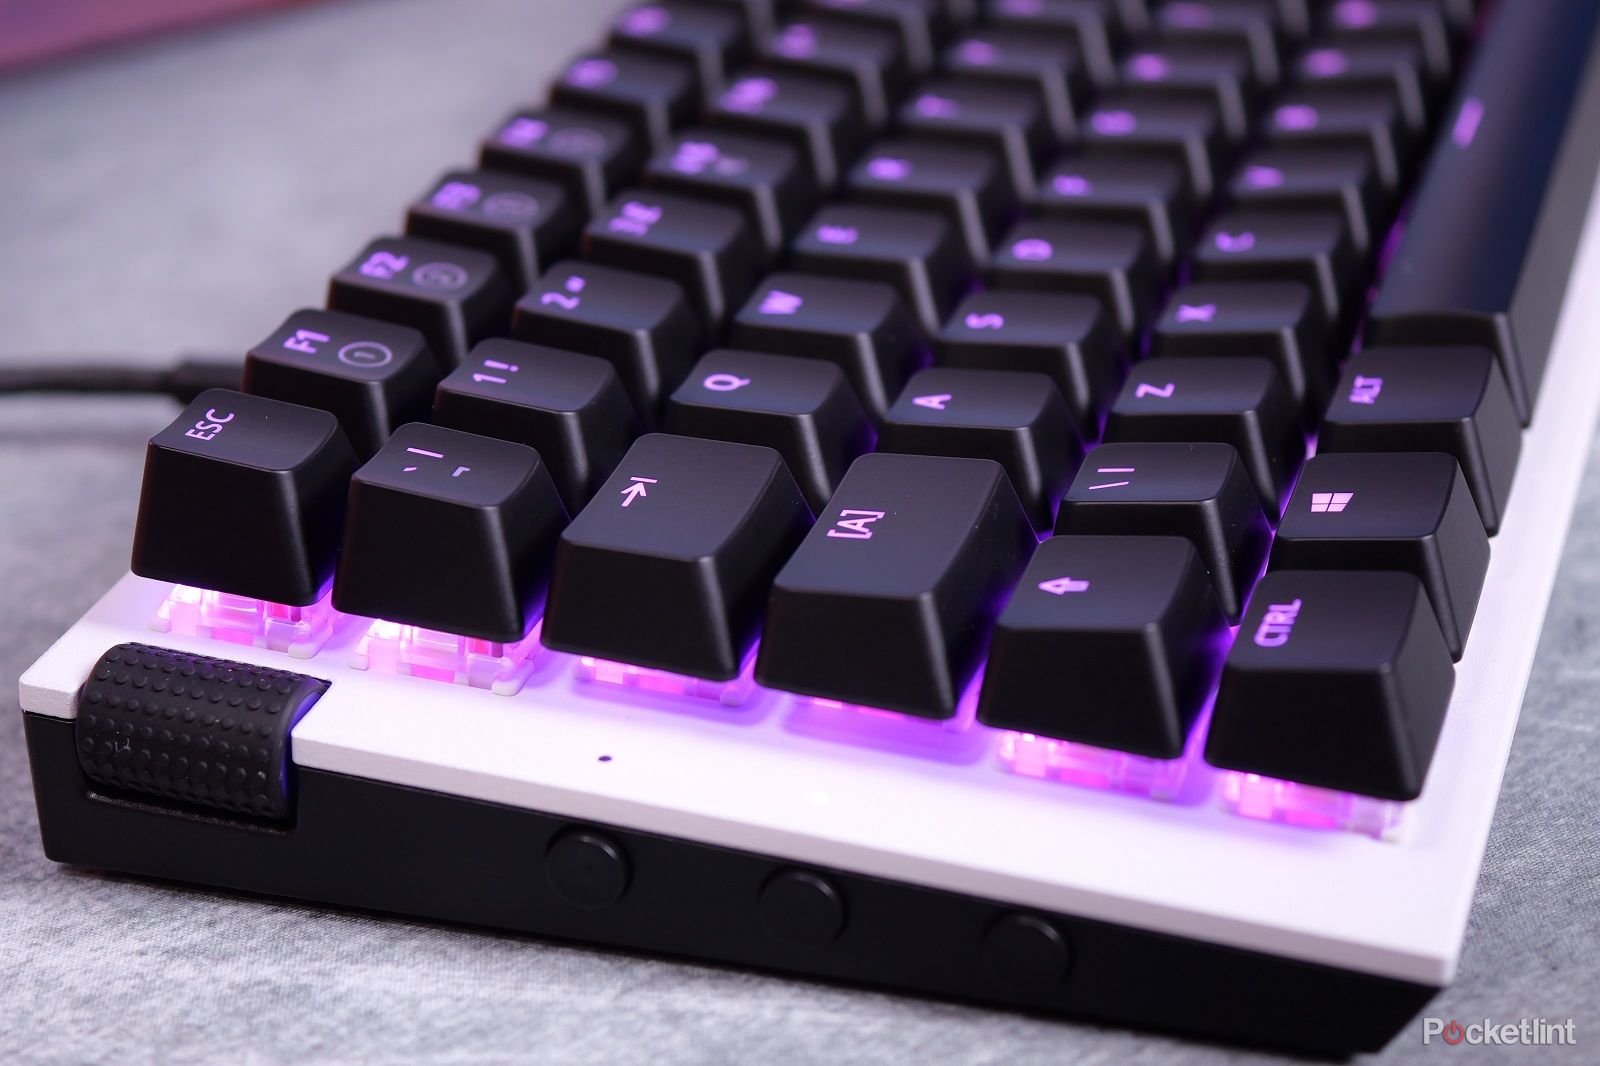 NZXT Function MINITKL keyboard review photo 4